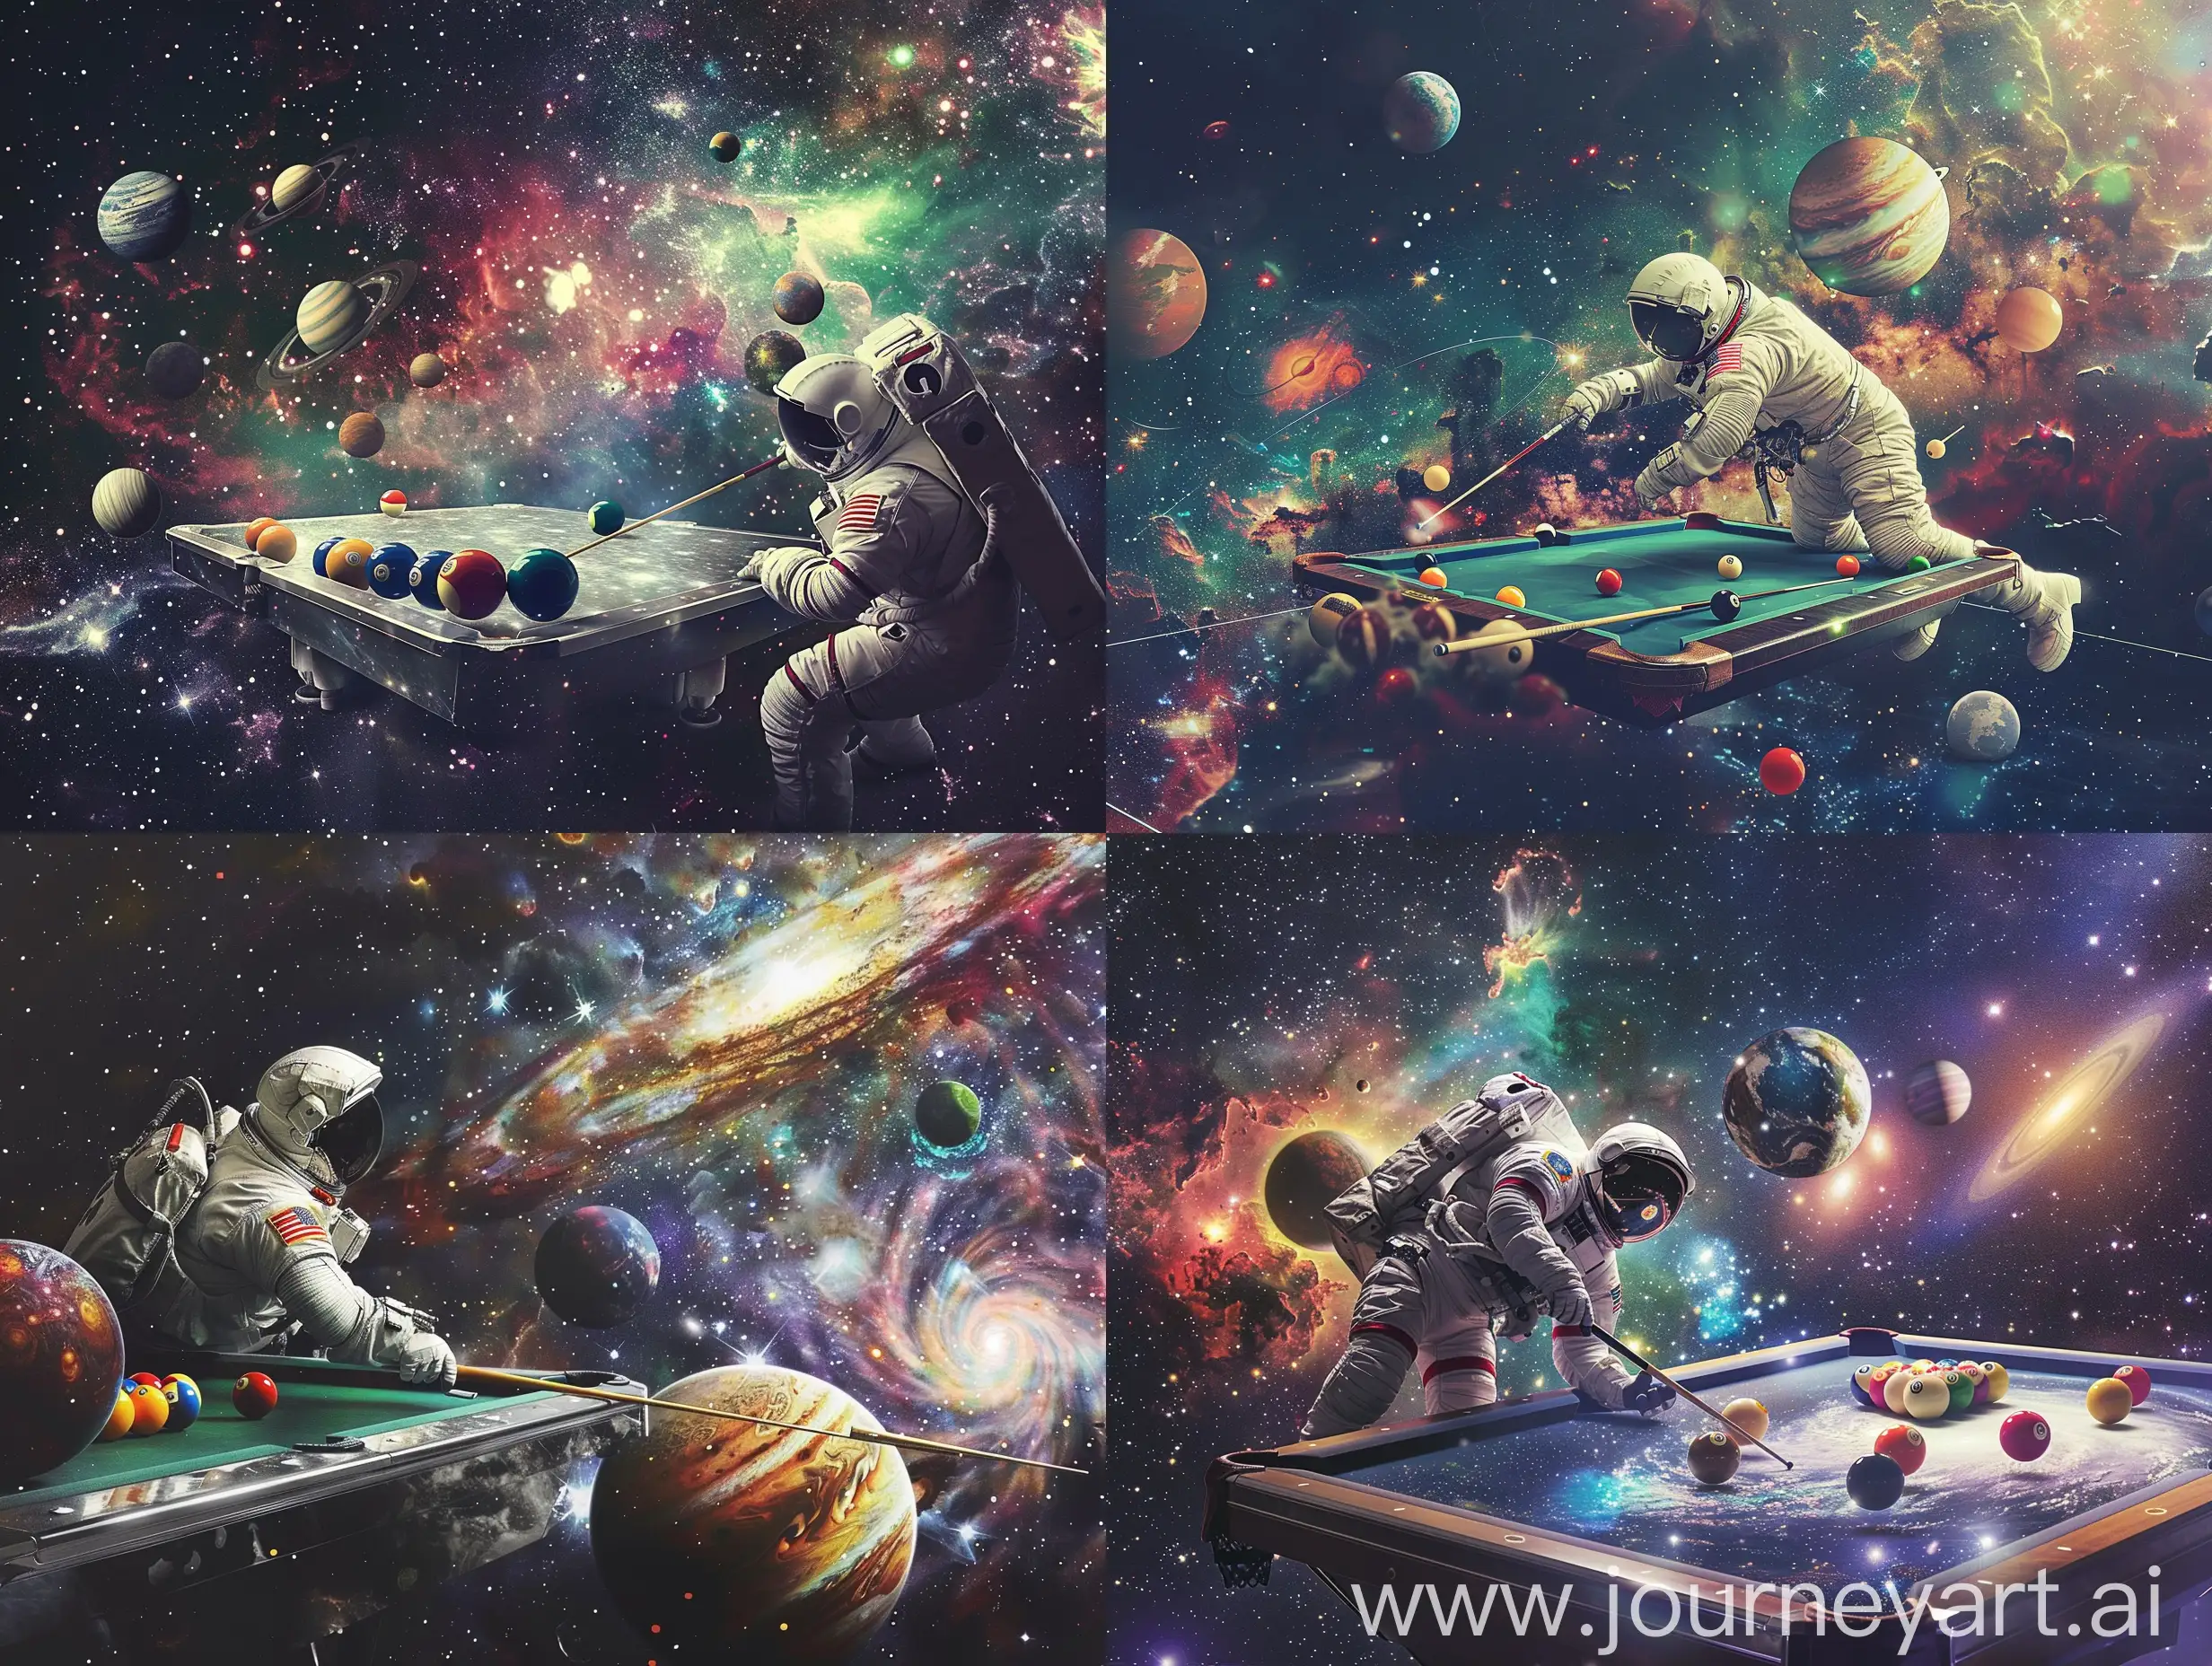 The background is a dark, starry space scene with colorful nebulae scattered throughout. In the foreground, an astronaut in a spacesuit is positioned as if leaning over a billiard table. The billiard table floats weightlessly in space, its surface resembling a starry galaxy. Instead of traditional billiard balls, the planets of the solar system are arranged on the table, each representing a different ball. The astronaut holds a cue stick and is aiming at one of the planetary balls, while the others orbit around in a mesmerizing dance. The scene is both surreal and captivating, blending the concepts of space exploration and leisurely recreation.]